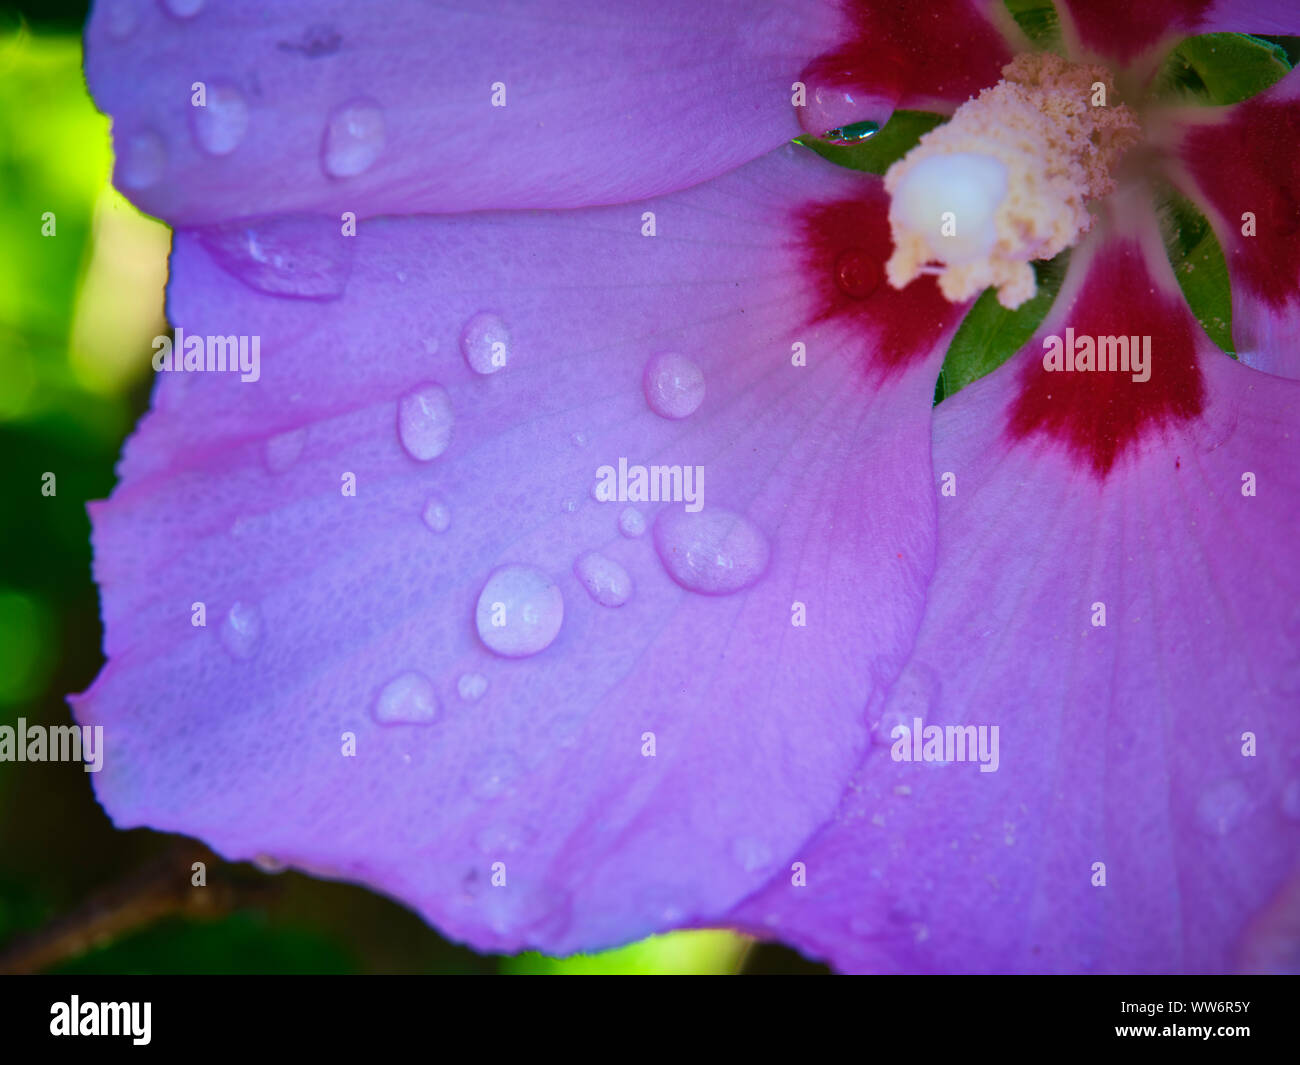 Rose Of Sharon With Water Rain Drops On Pink Petals Stock Photo